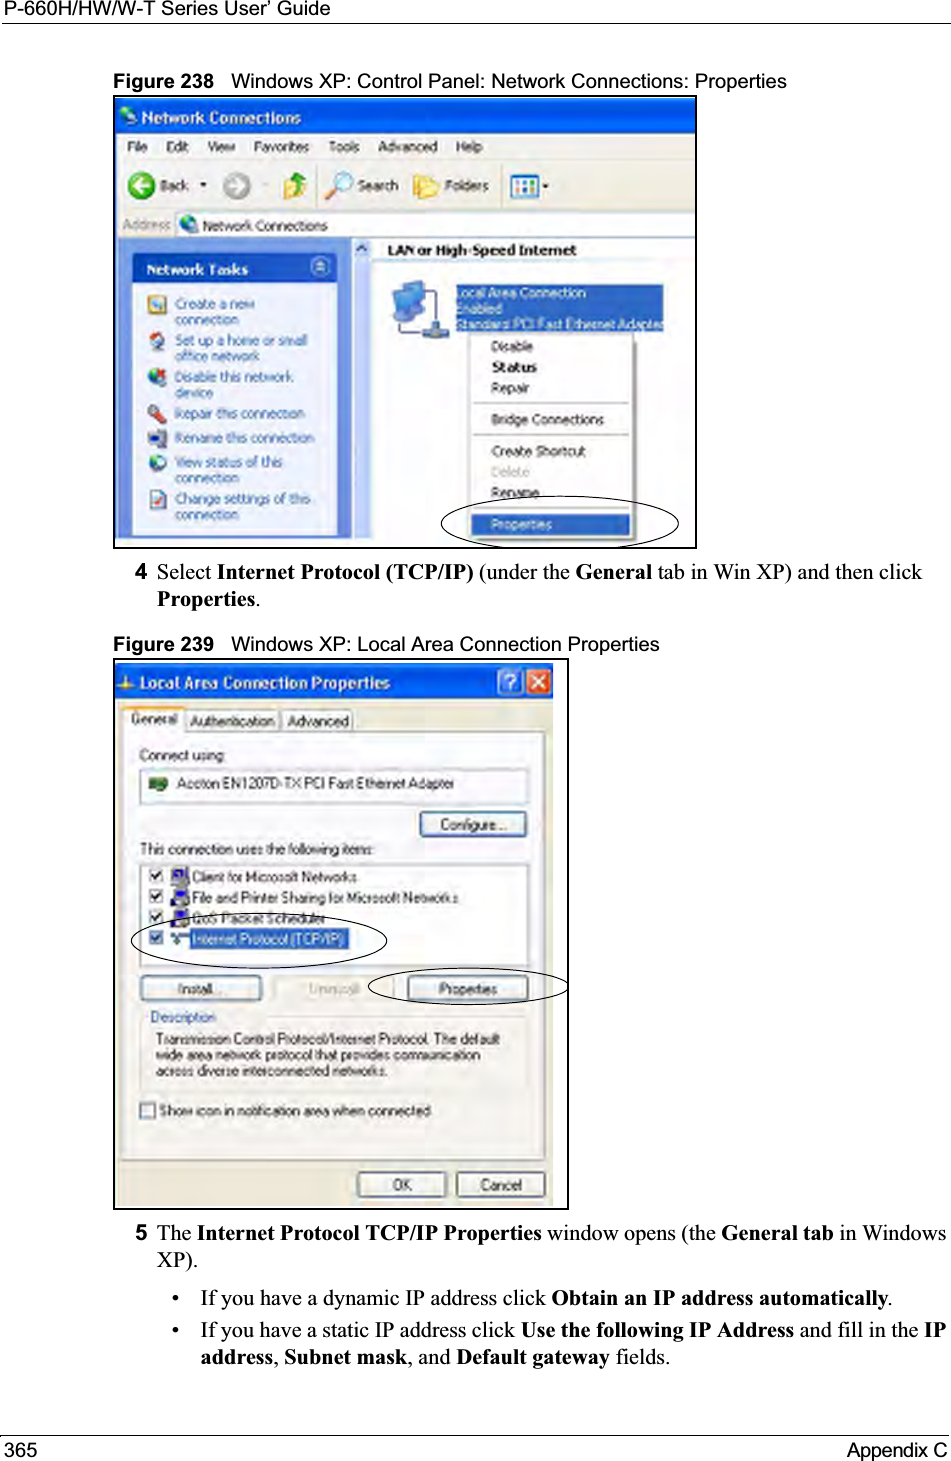 P-660H/HW/W-T Series User’ Guide365 Appendix CFigure 238   Windows XP: Control Panel: Network Connections: Properties4Select Internet Protocol (TCP/IP) (under the General tab in Win XP) and then click Properties.Figure 239   Windows XP: Local Area Connection Properties5The Internet Protocol TCP/IP Properties window opens (the General tab in Windows XP).• If you have a dynamic IP address click Obtain an IP address automatically.• If you have a static IP address click Use the following IP Address and fill in the IPaddress,Subnet mask, and Default gateway fields. 